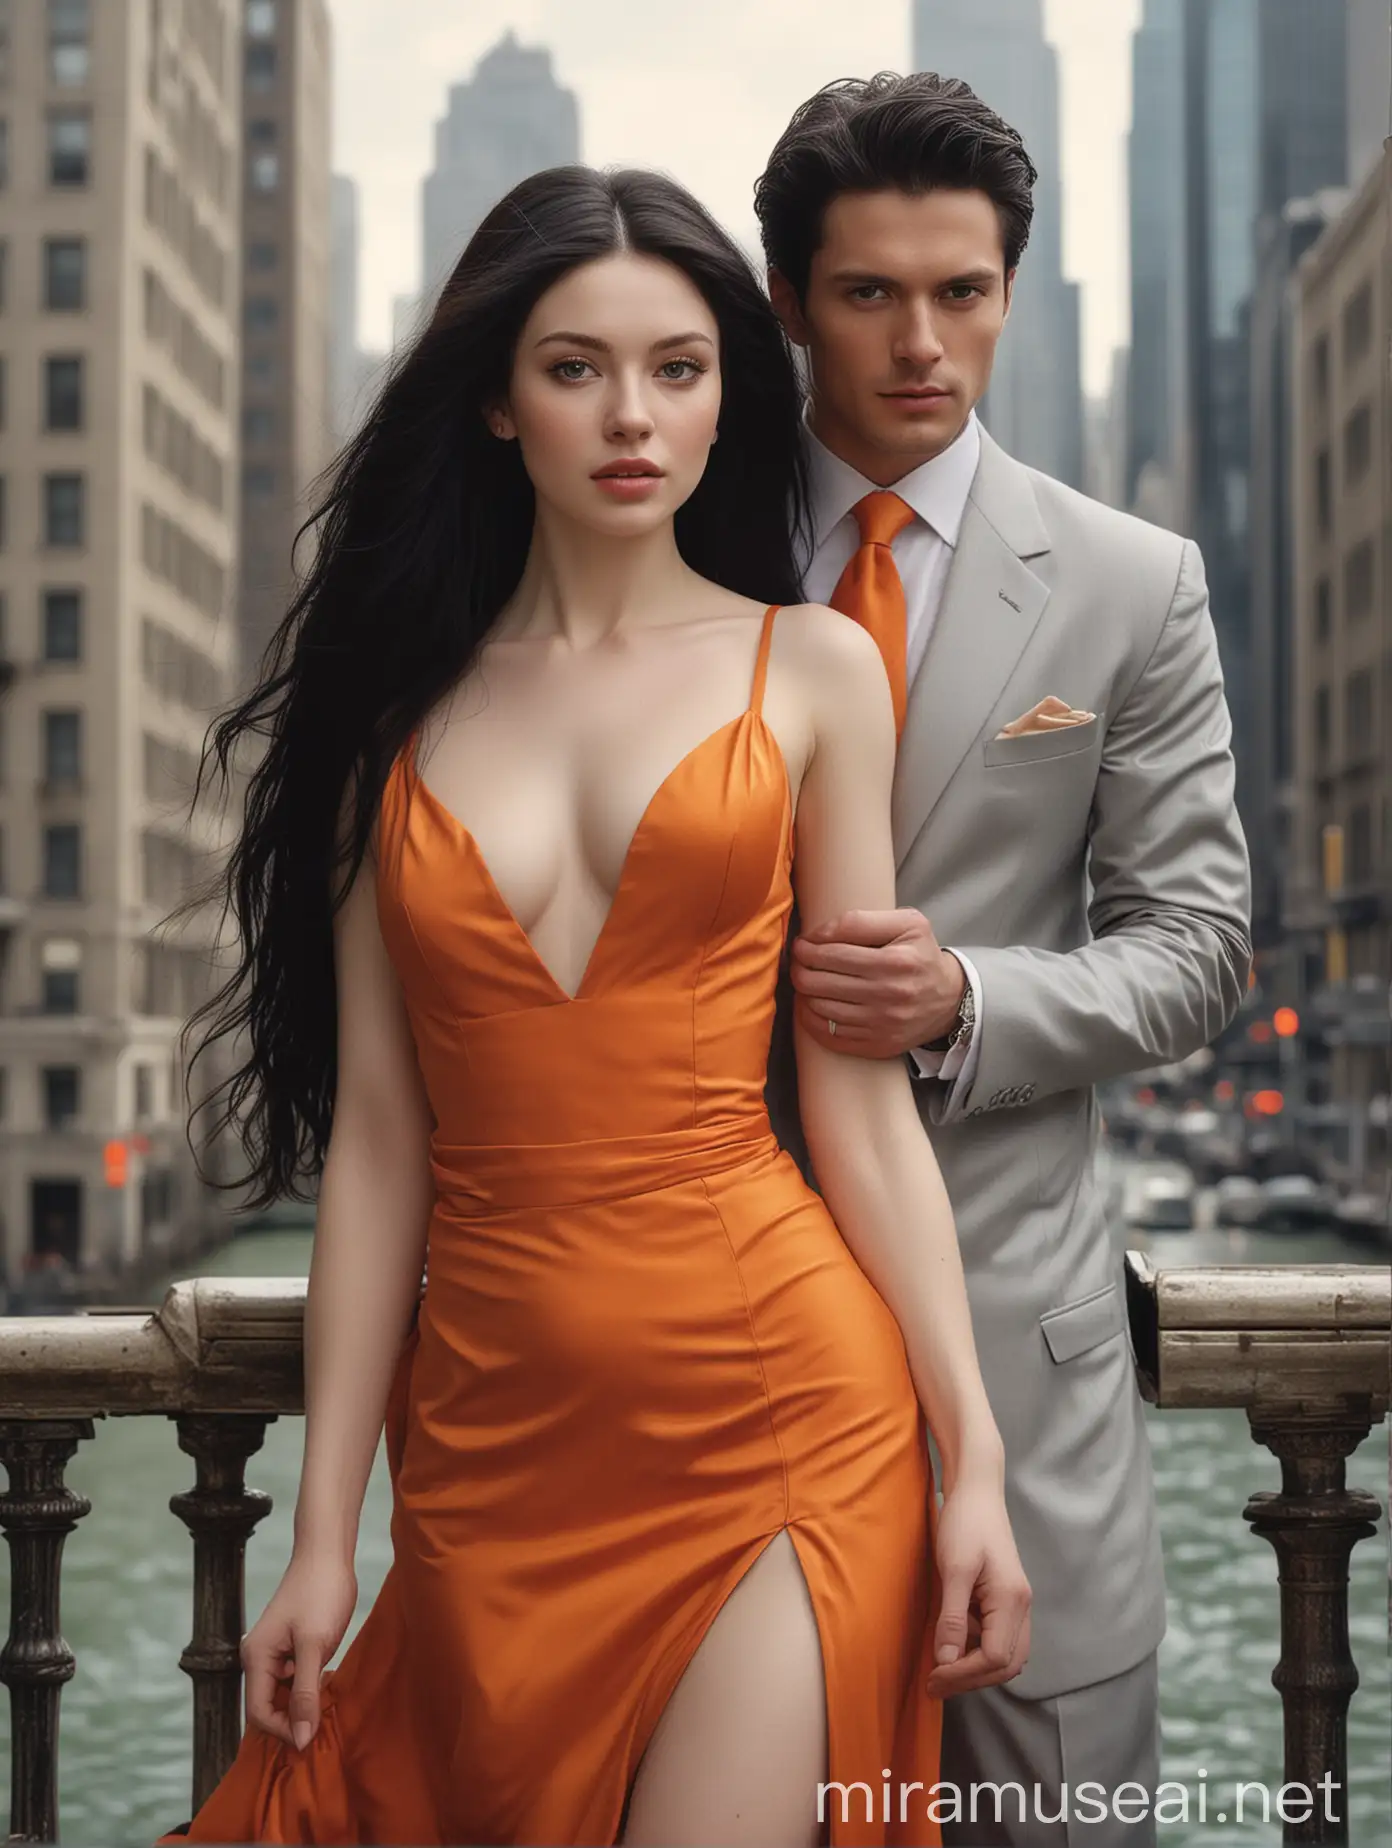 The subject of the portrait is a woman with white, pale skin and a flawless physique and a man that has pale flawless skin. The woman have long, lustrous black hair that shines brightly and the woman is wearing a captivating orange dress that highlights her hourglass shaped body while the man on her side is wearing business attire and the man should have short regulation-cut silver hair. The image should prominently highlight their brown eyes while ensuring the eye and hair color remain distinct. The background should be tall buildings in the island.